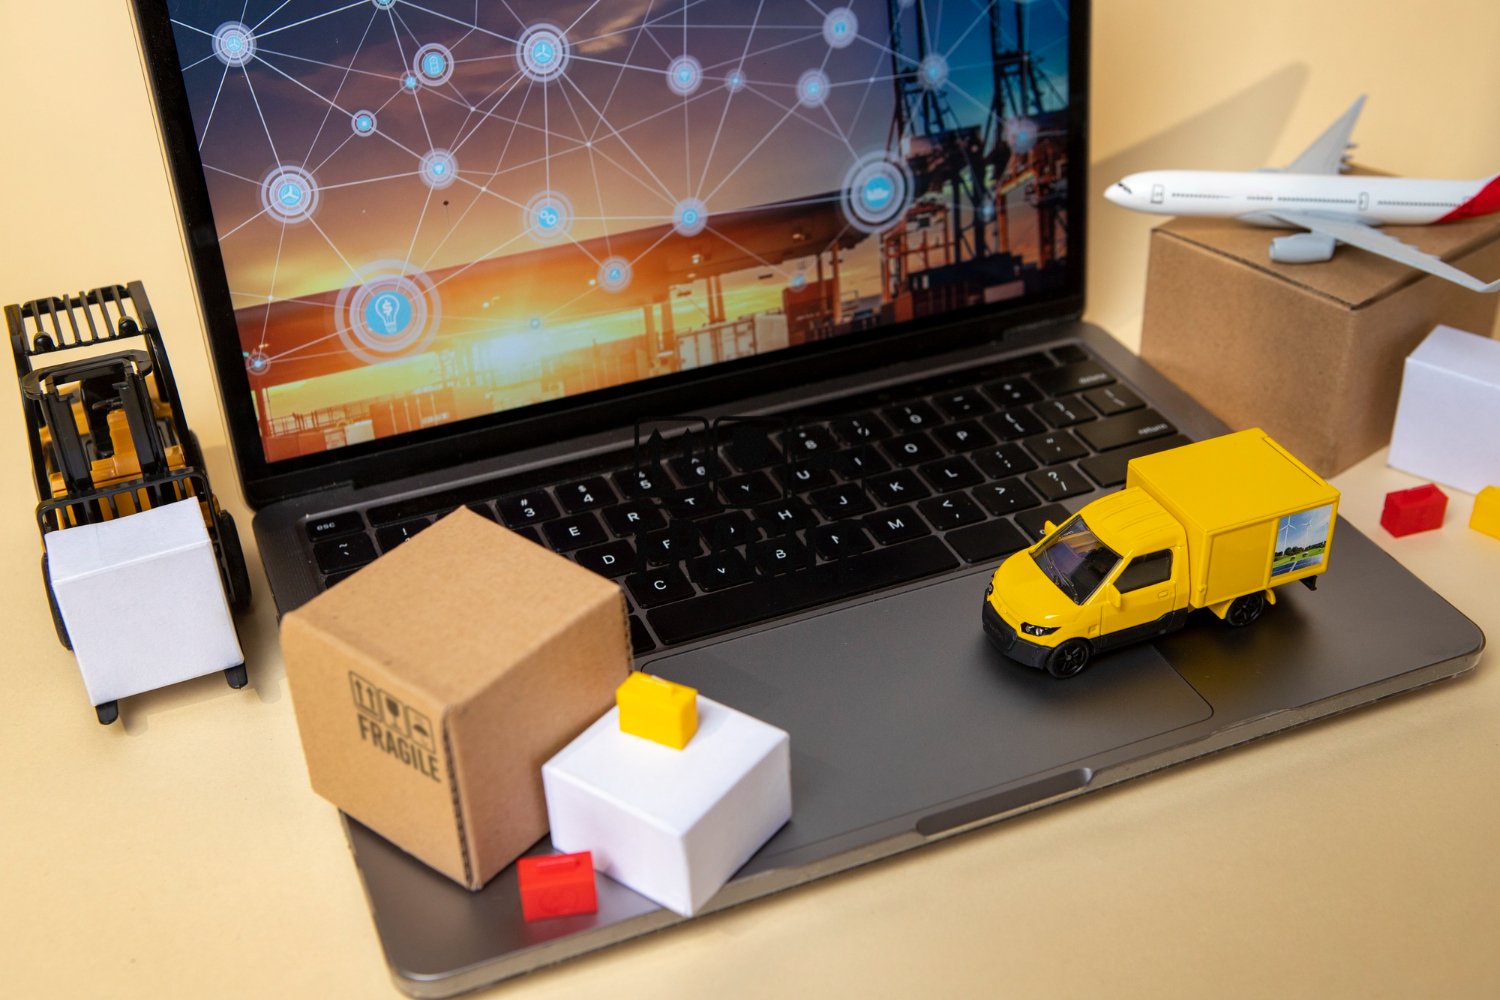 How Amazon Inc is expanding in logistics sector